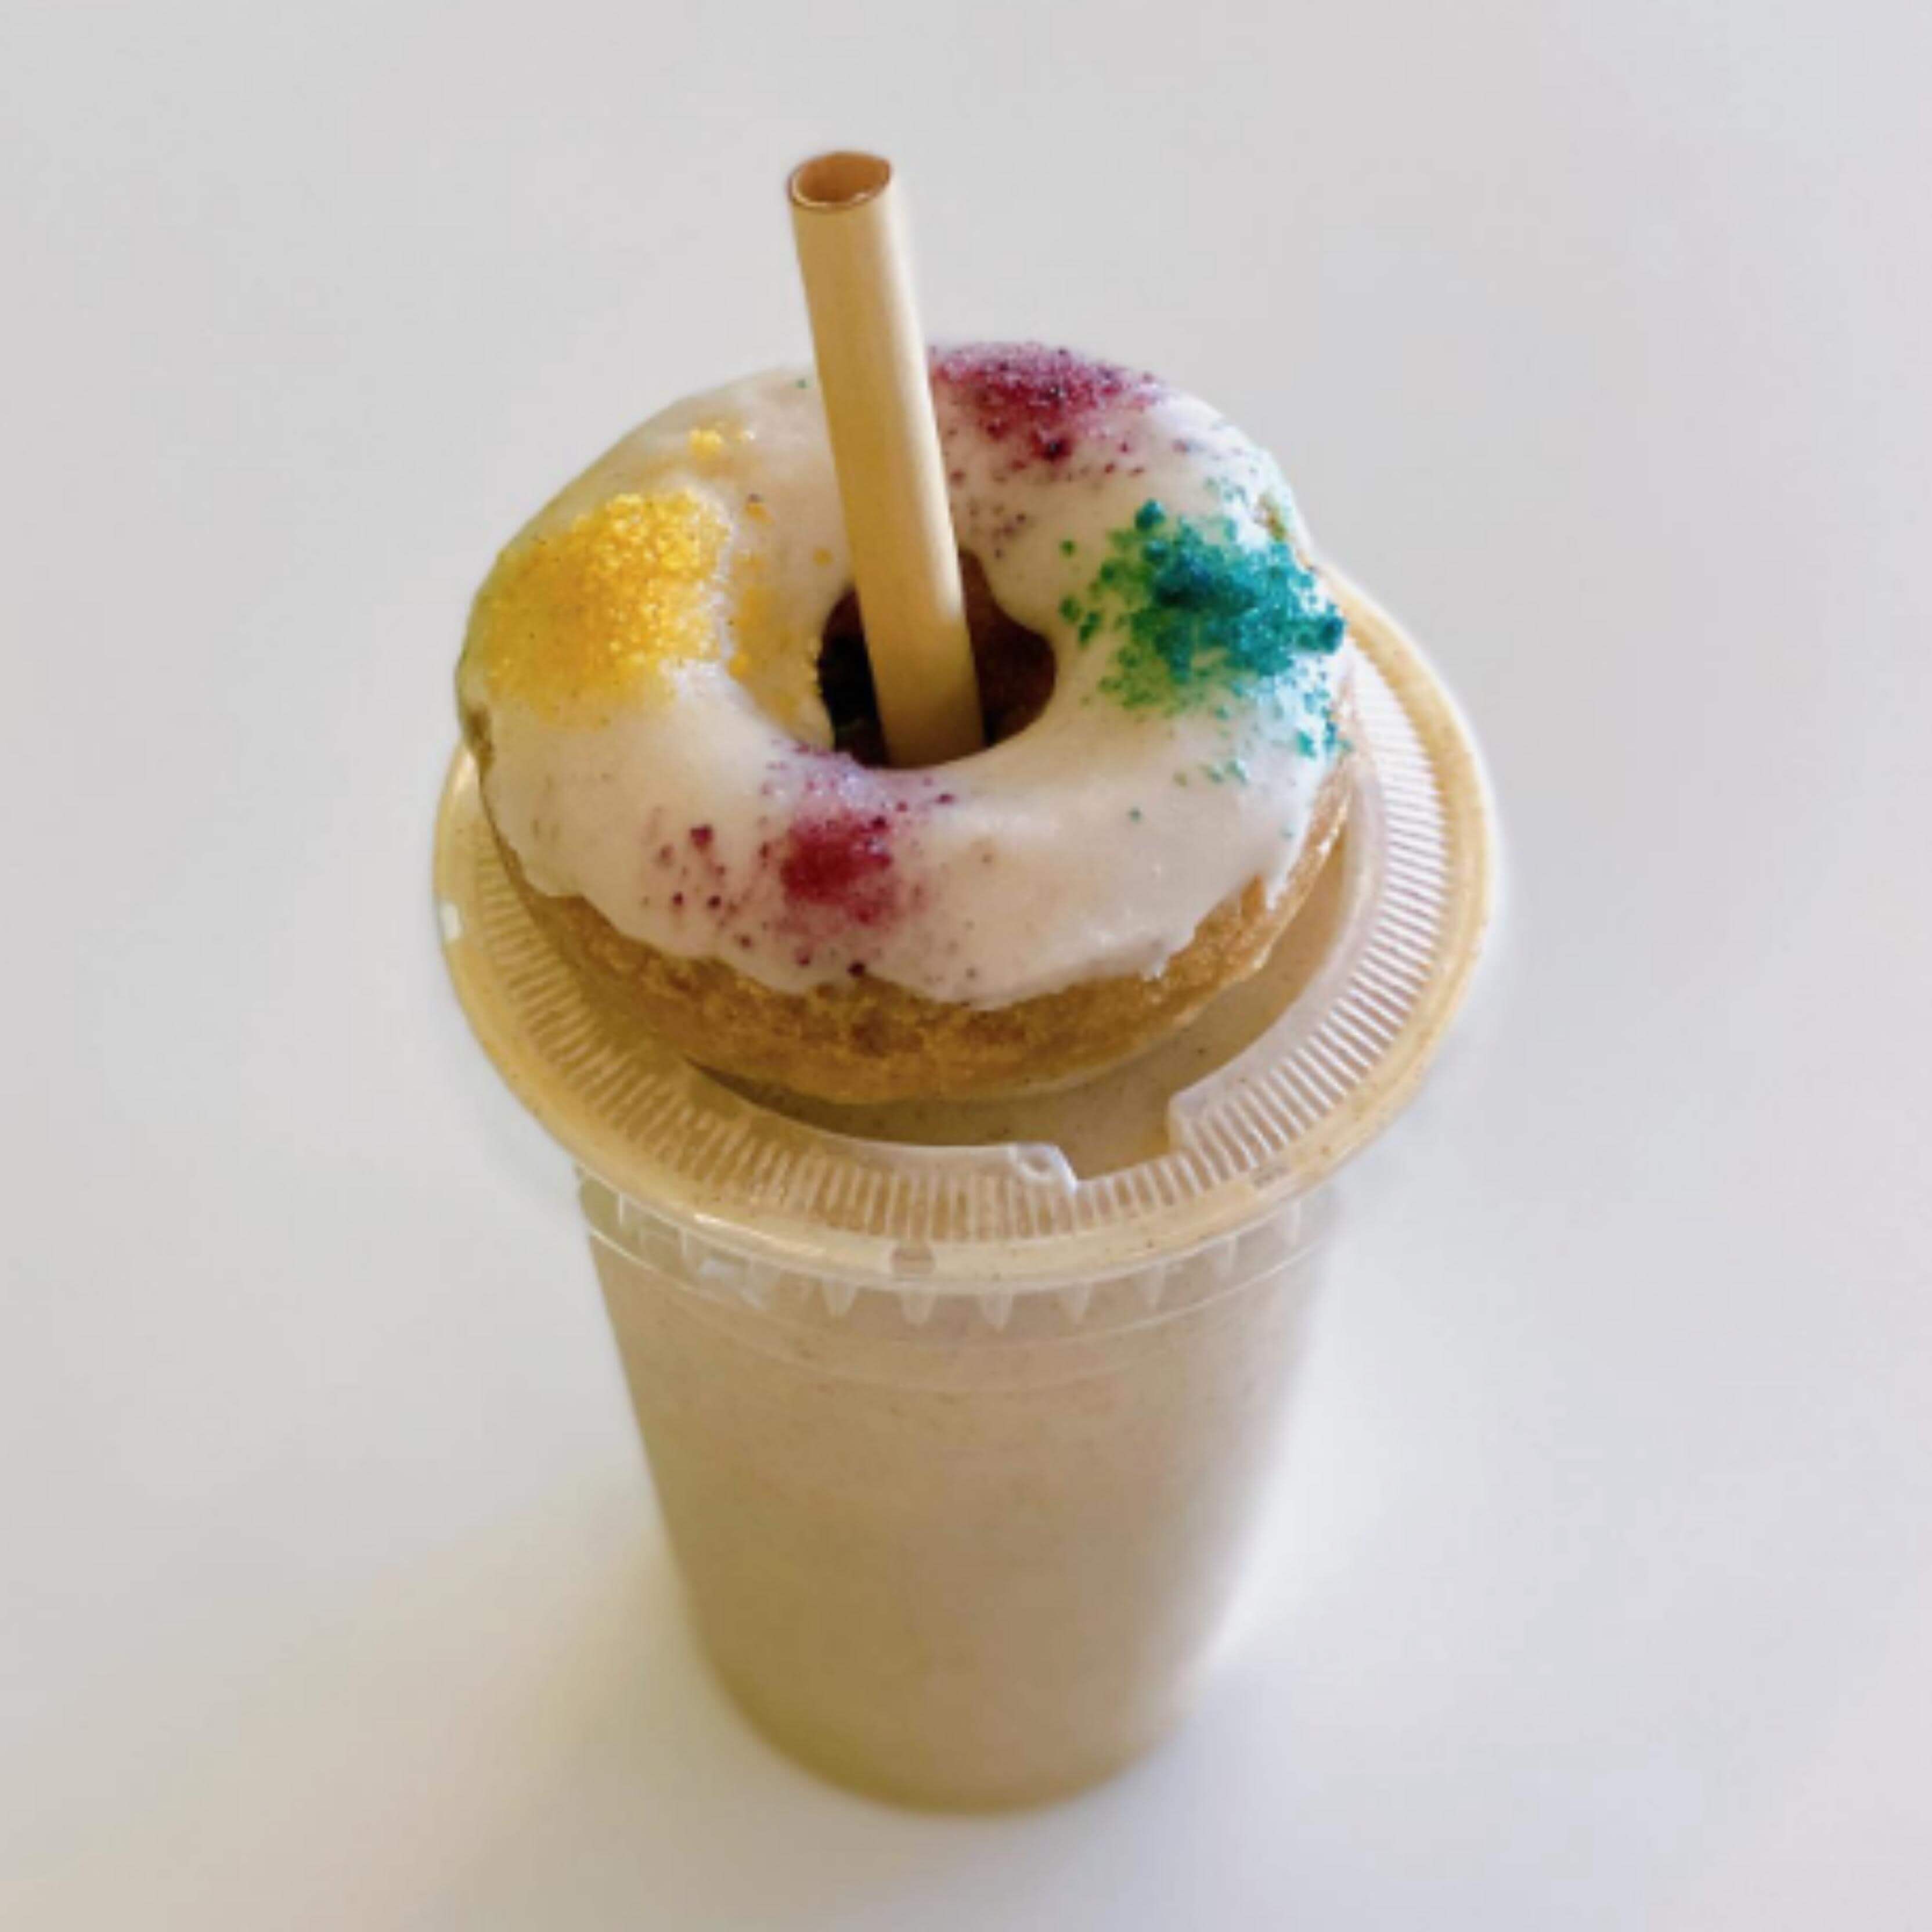 A milkshake in a clear cup is topped with a colorful donut, which has a jumbo reed straw inserted through its center. The straw, made from biodegradable reed stems and resembling bamboo, provides a sustainable touch. The donut is decorated with a white icing glaze and multicolored sugar crystals, creating a playful, whimsical garnish. The background is plain white, emphasizing the focus on the drink's unique presentation.